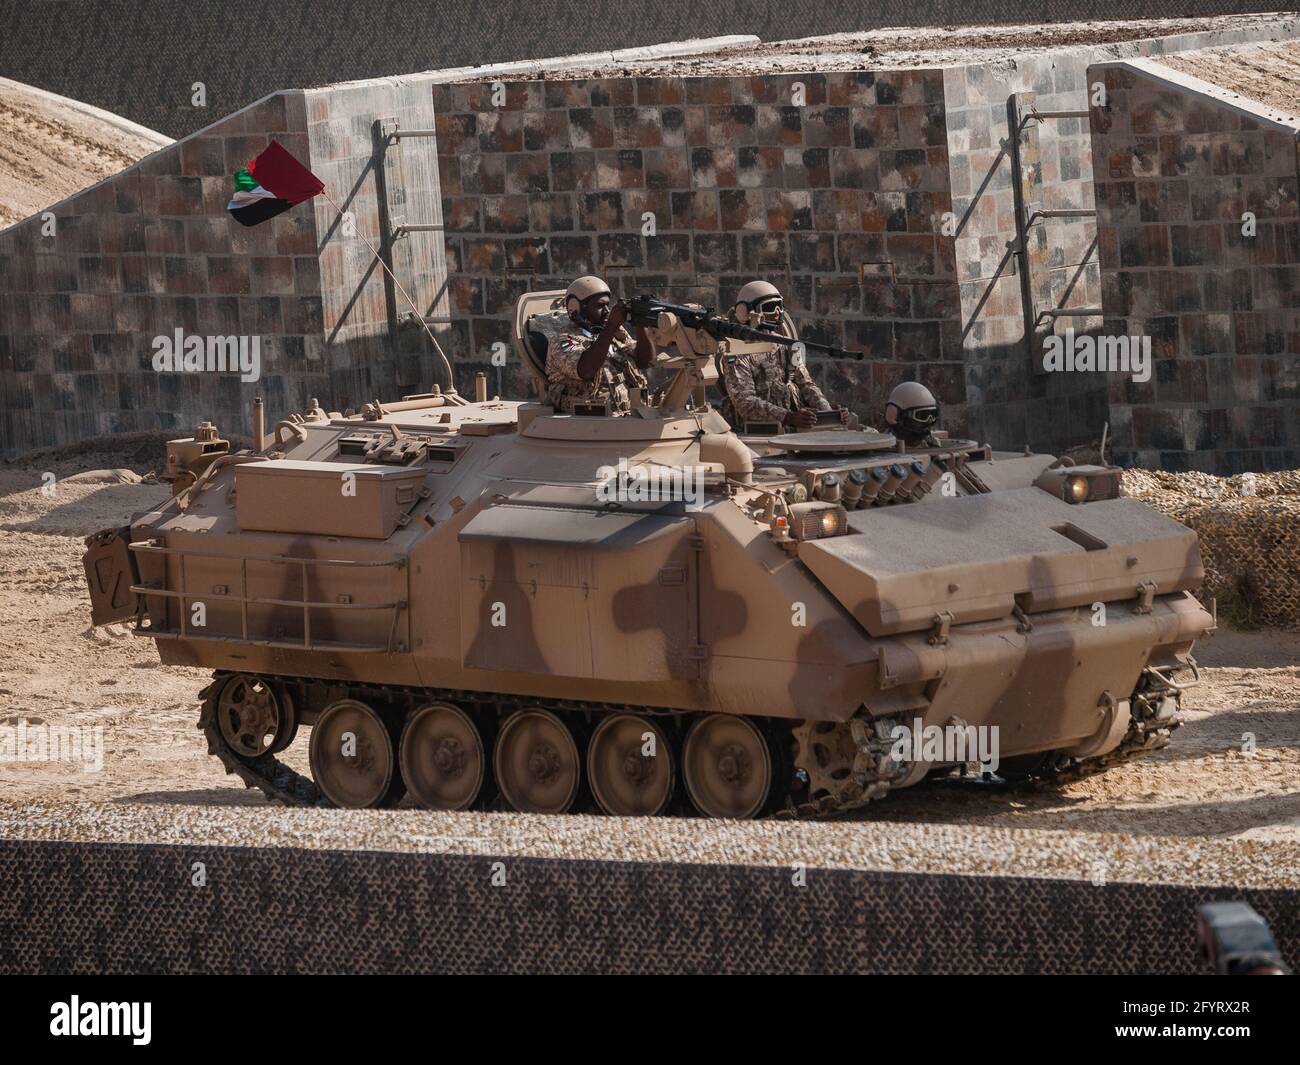 Abu Dhabi, UAE - Feb.20.2013: FNSS ACV-300 APC (Armoured personnel carrier) at IDEX 2015 IDEX 2013 military exibition Stock Photo